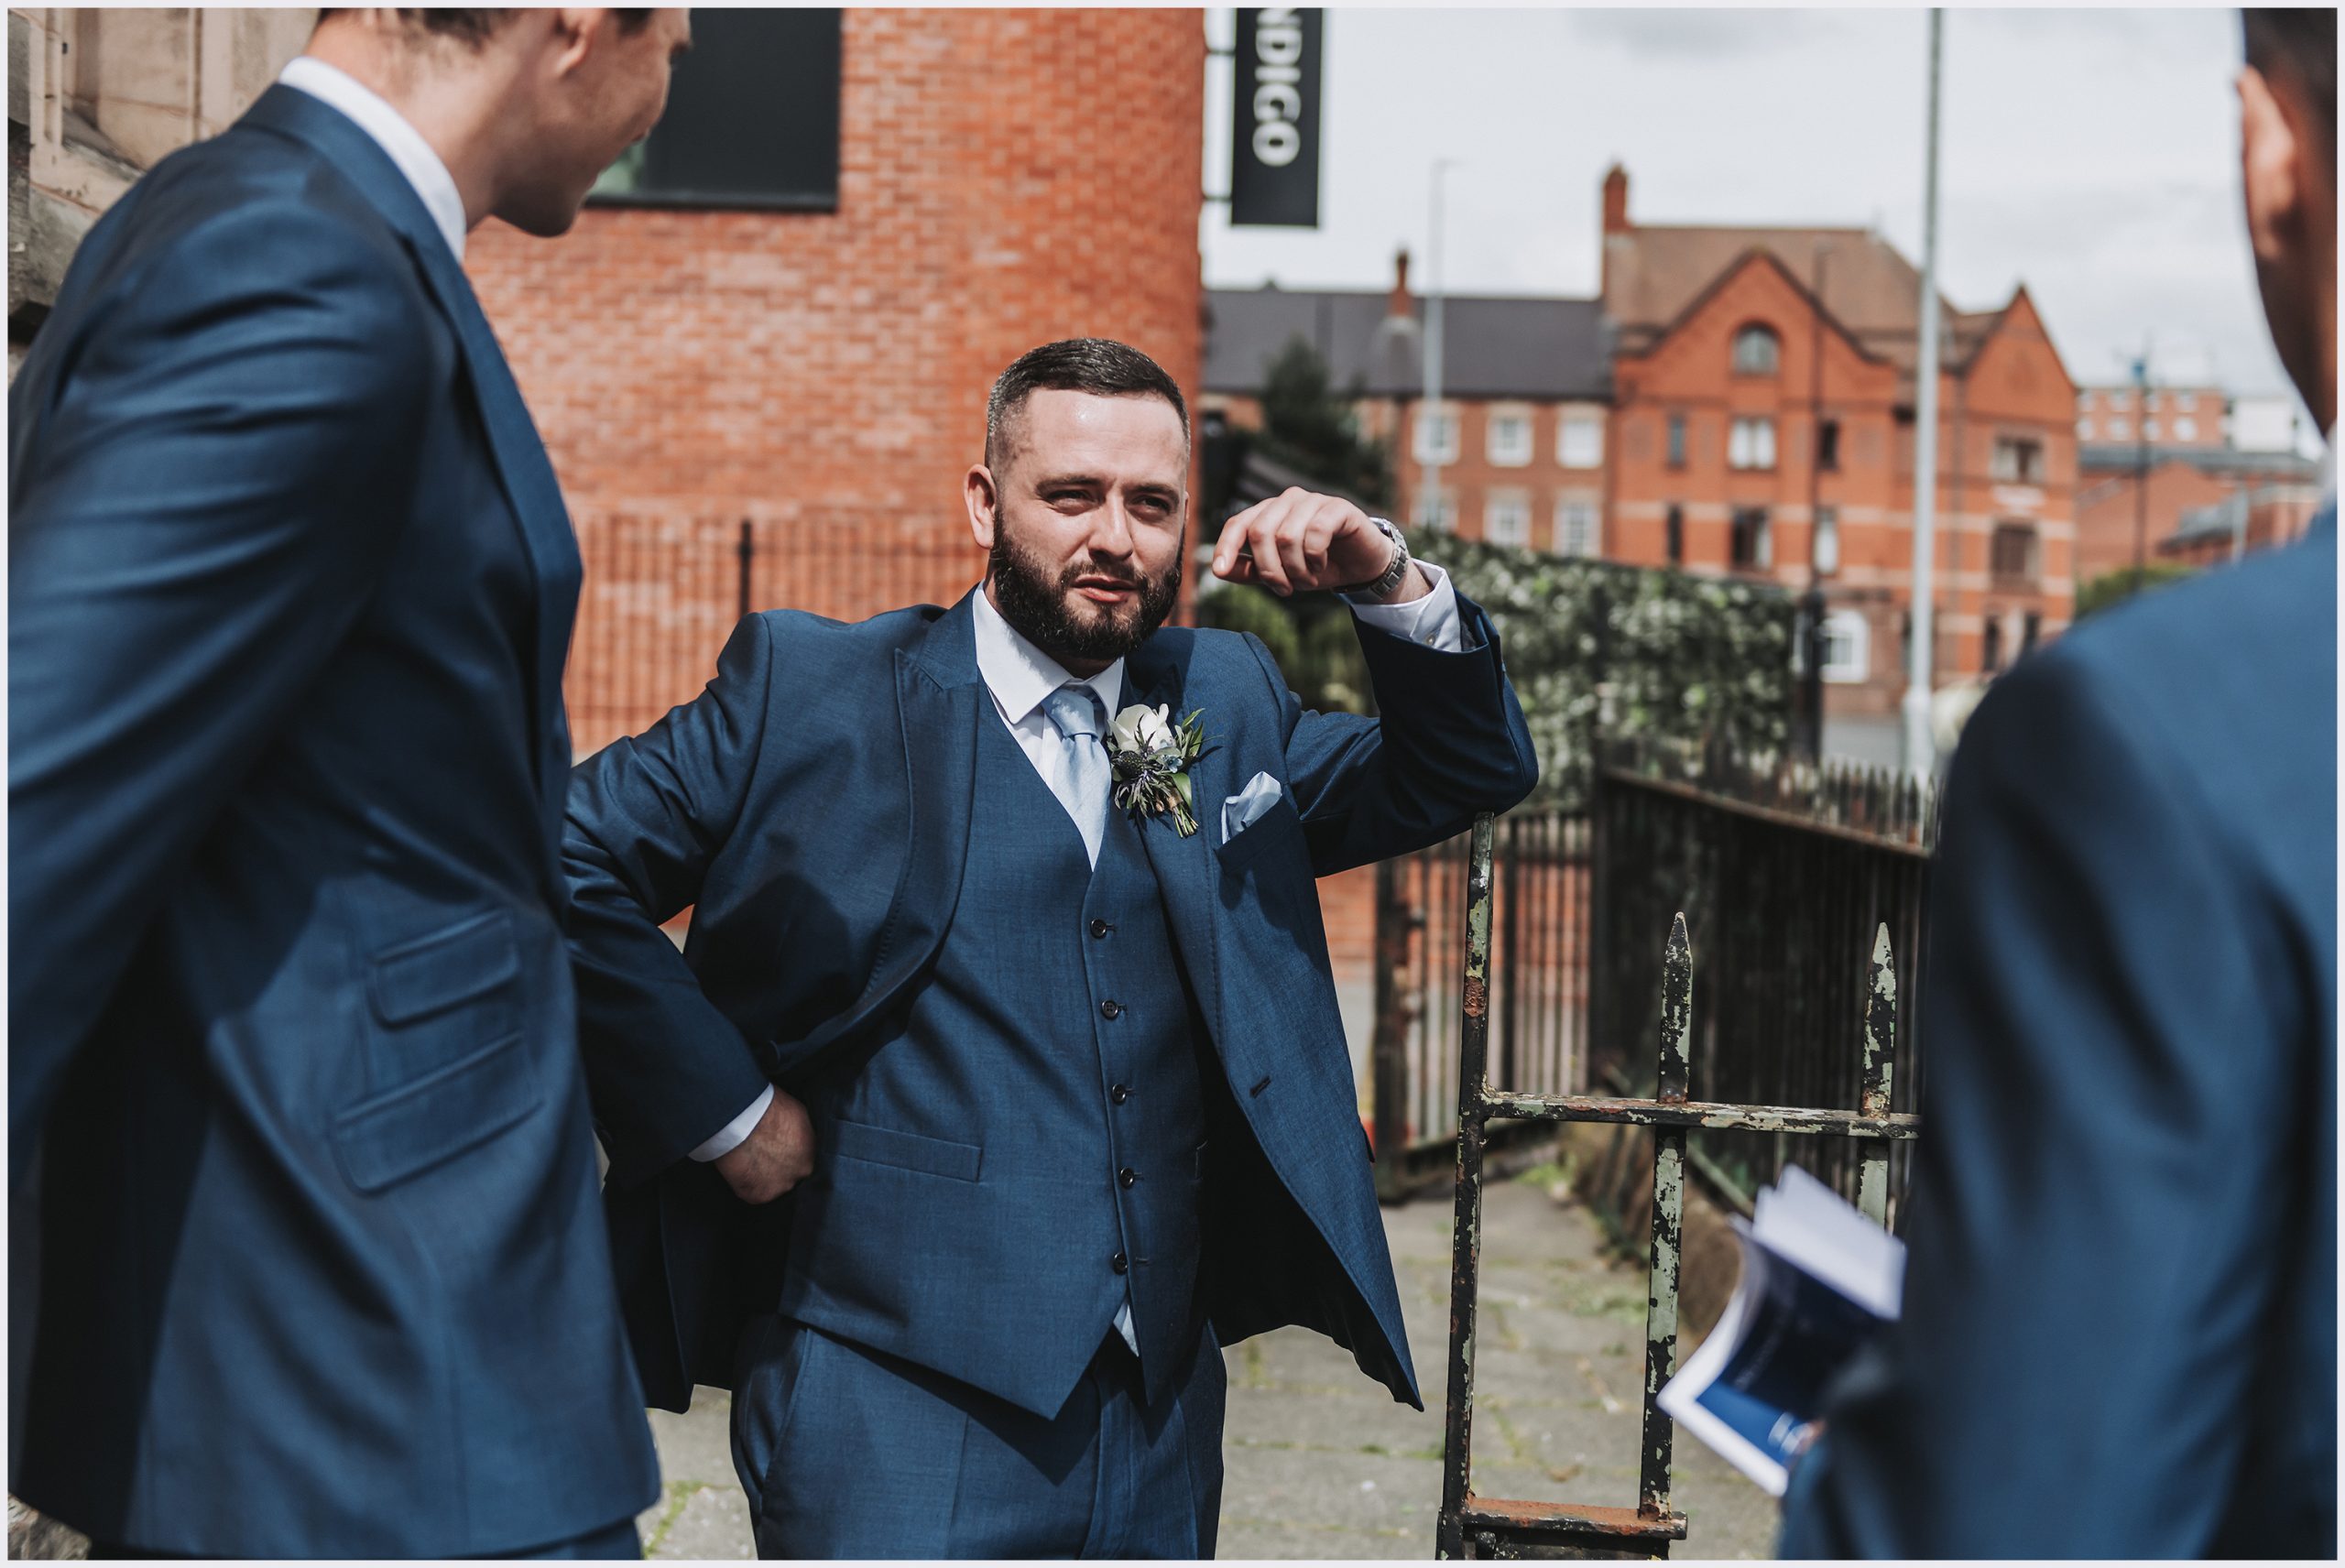 An usher wearing a blue suit casually leans his elbow against the church gate while greeting wedding guests into the church.  Image captured by north Wales wedding Photographer Helena Jayne Photography